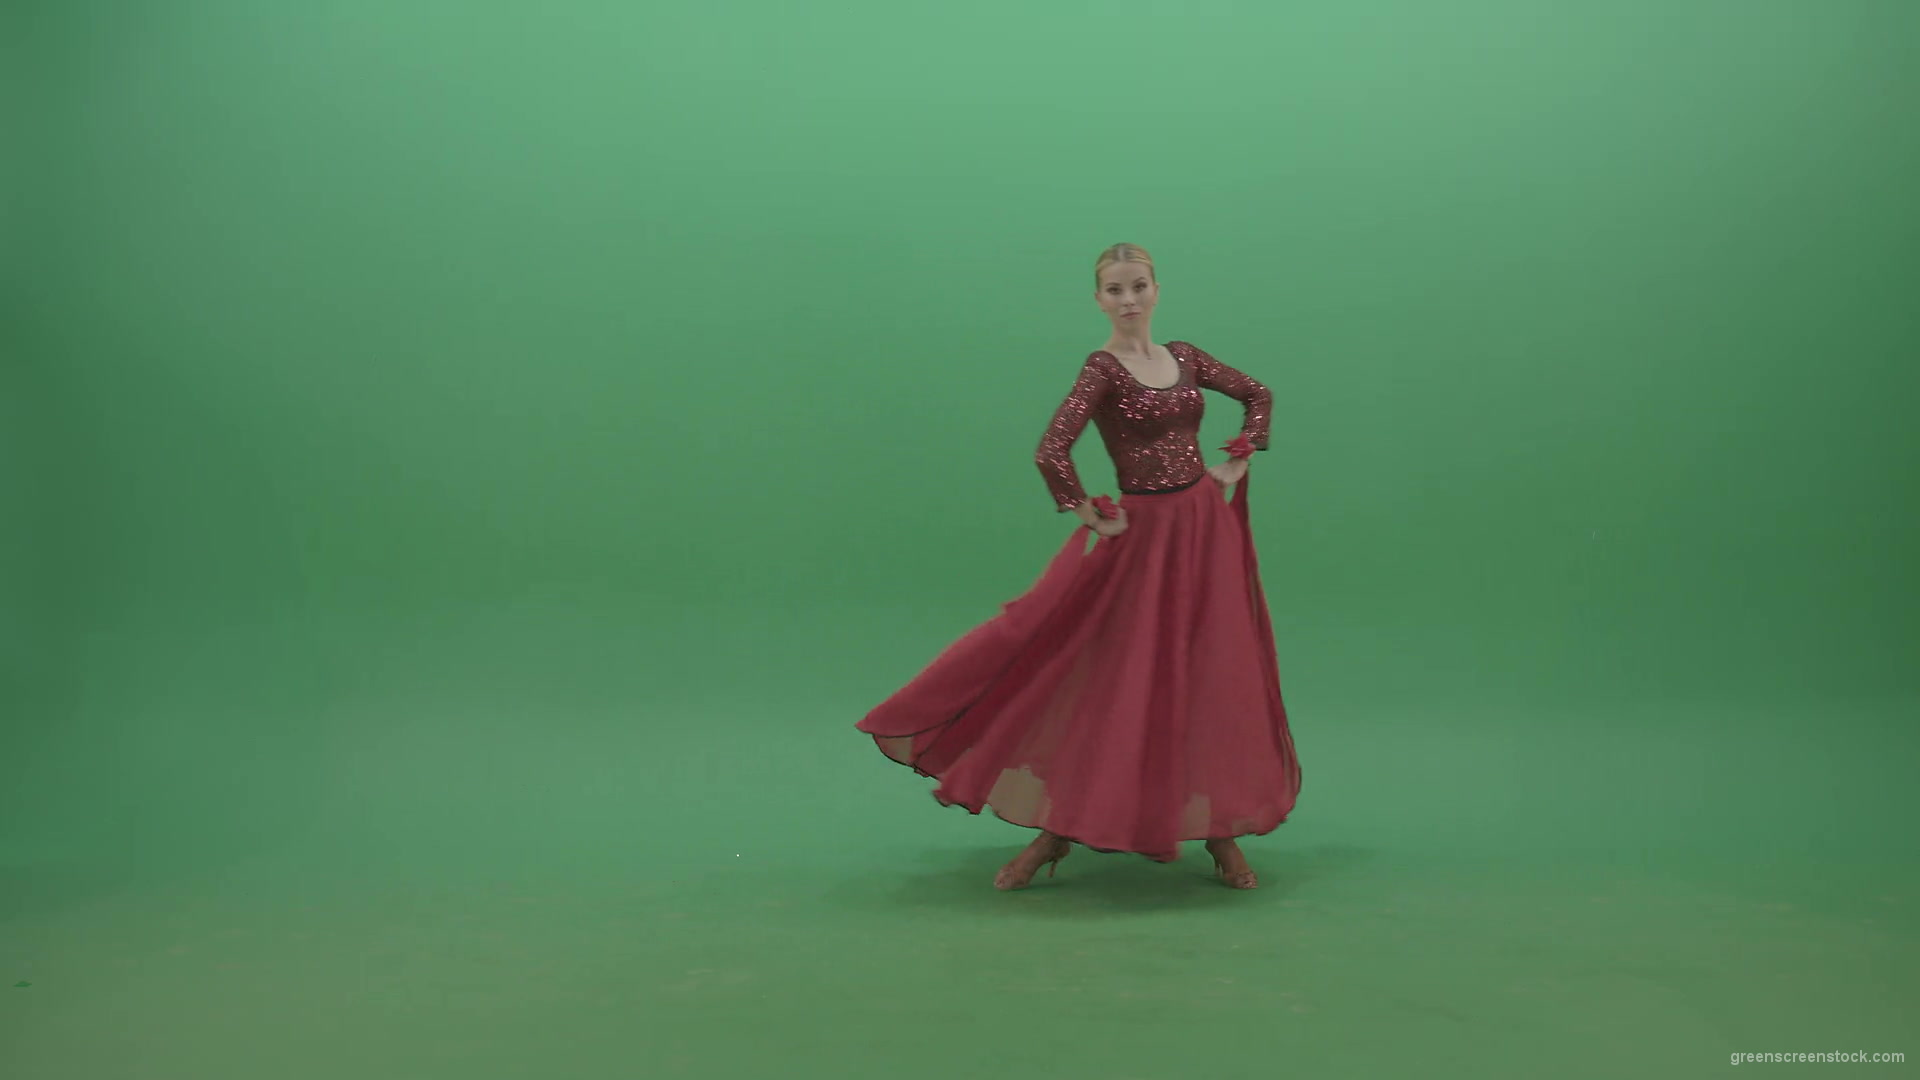 Blondie-in-red-latino-wear-moving-and-dance-on-green-screen-4K-Video-Footage-1920_008 Green Screen Stock